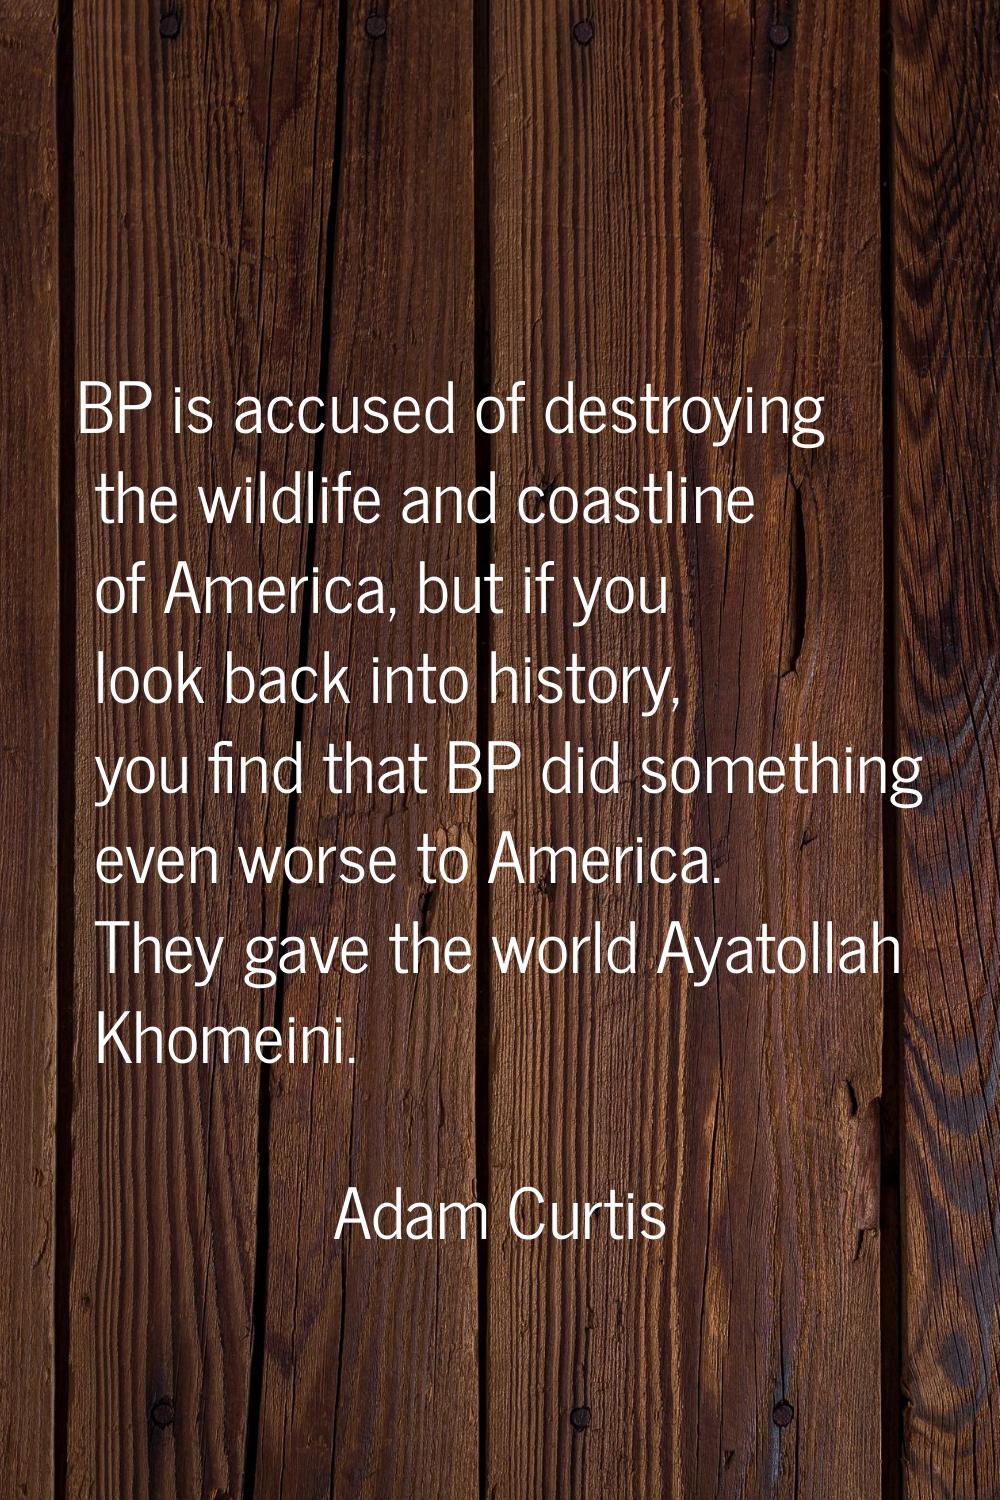 BP is accused of destroying the wildlife and coastline of America, but if you look back into histor